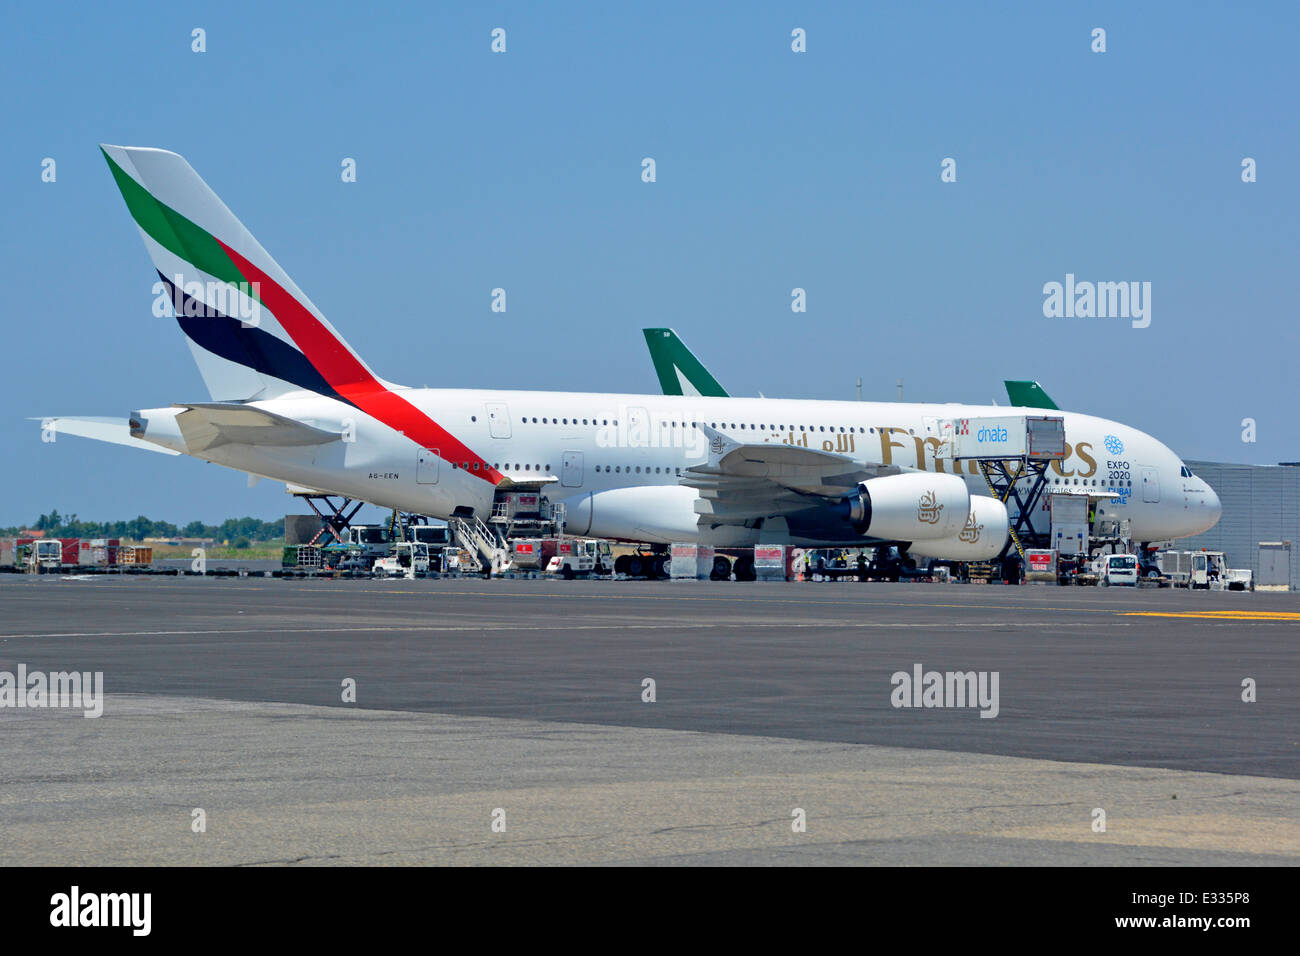 Emirates logo on Airbus A380 double deck wide body four engine jet airplane airport apron stand ground crew in attendance Rome Fiumicino Airport Italy Stock Photo